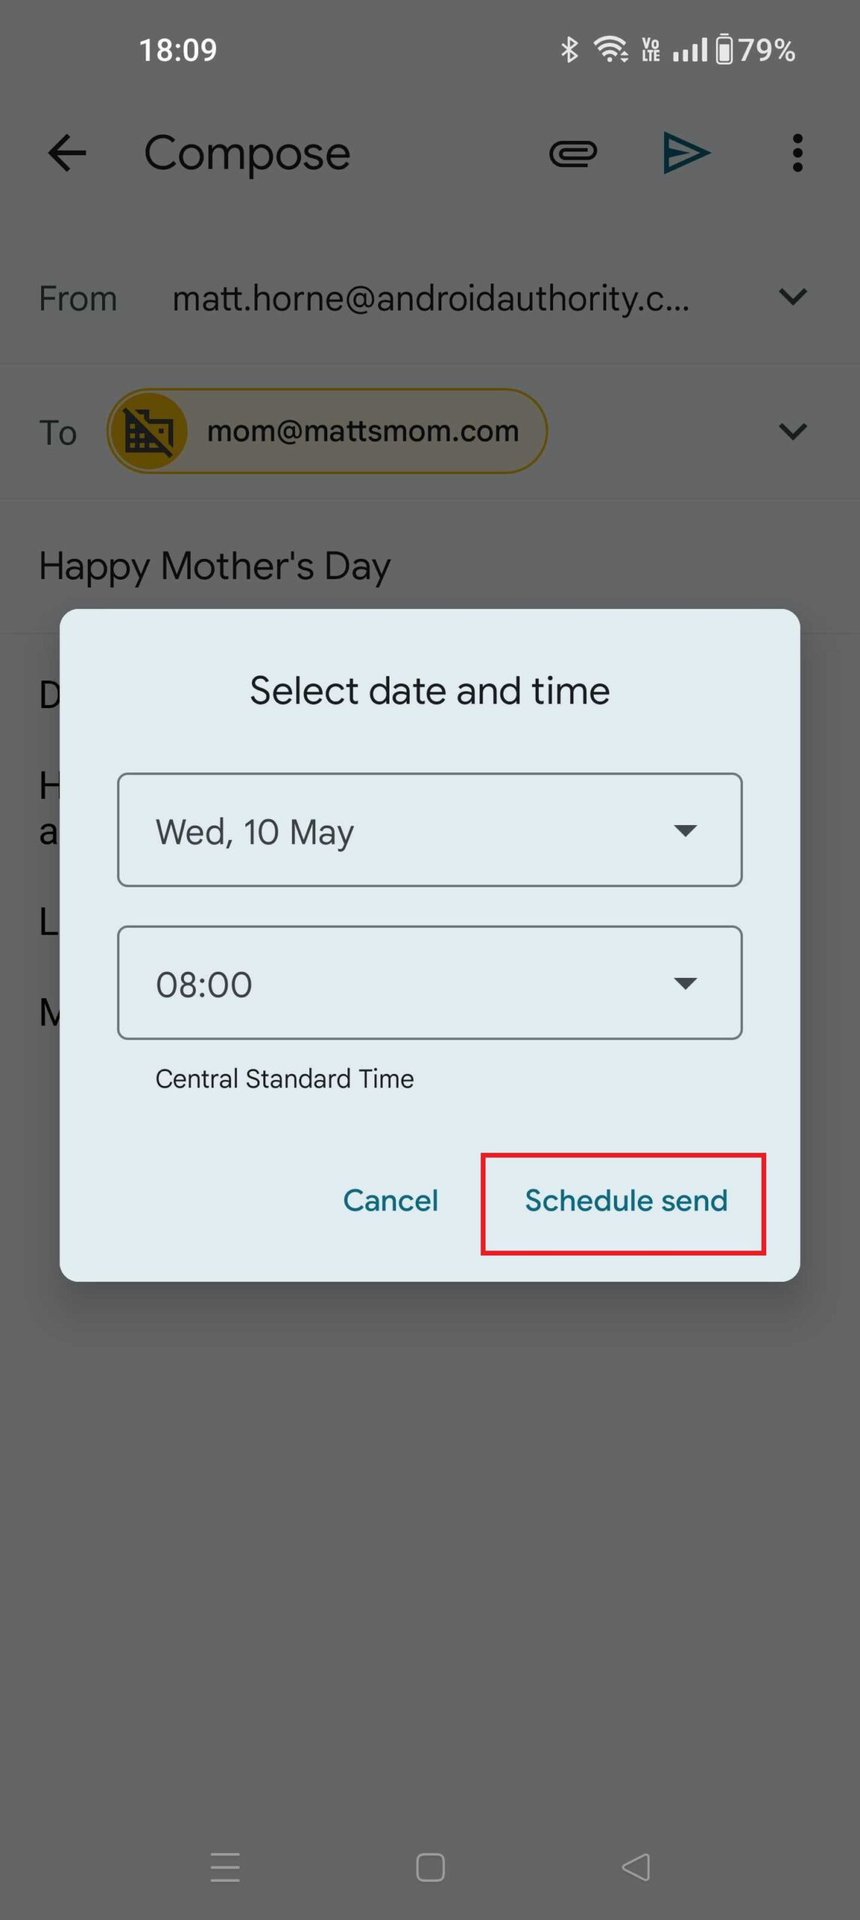 Gmail App Schedule Send Pick Date and Time 4